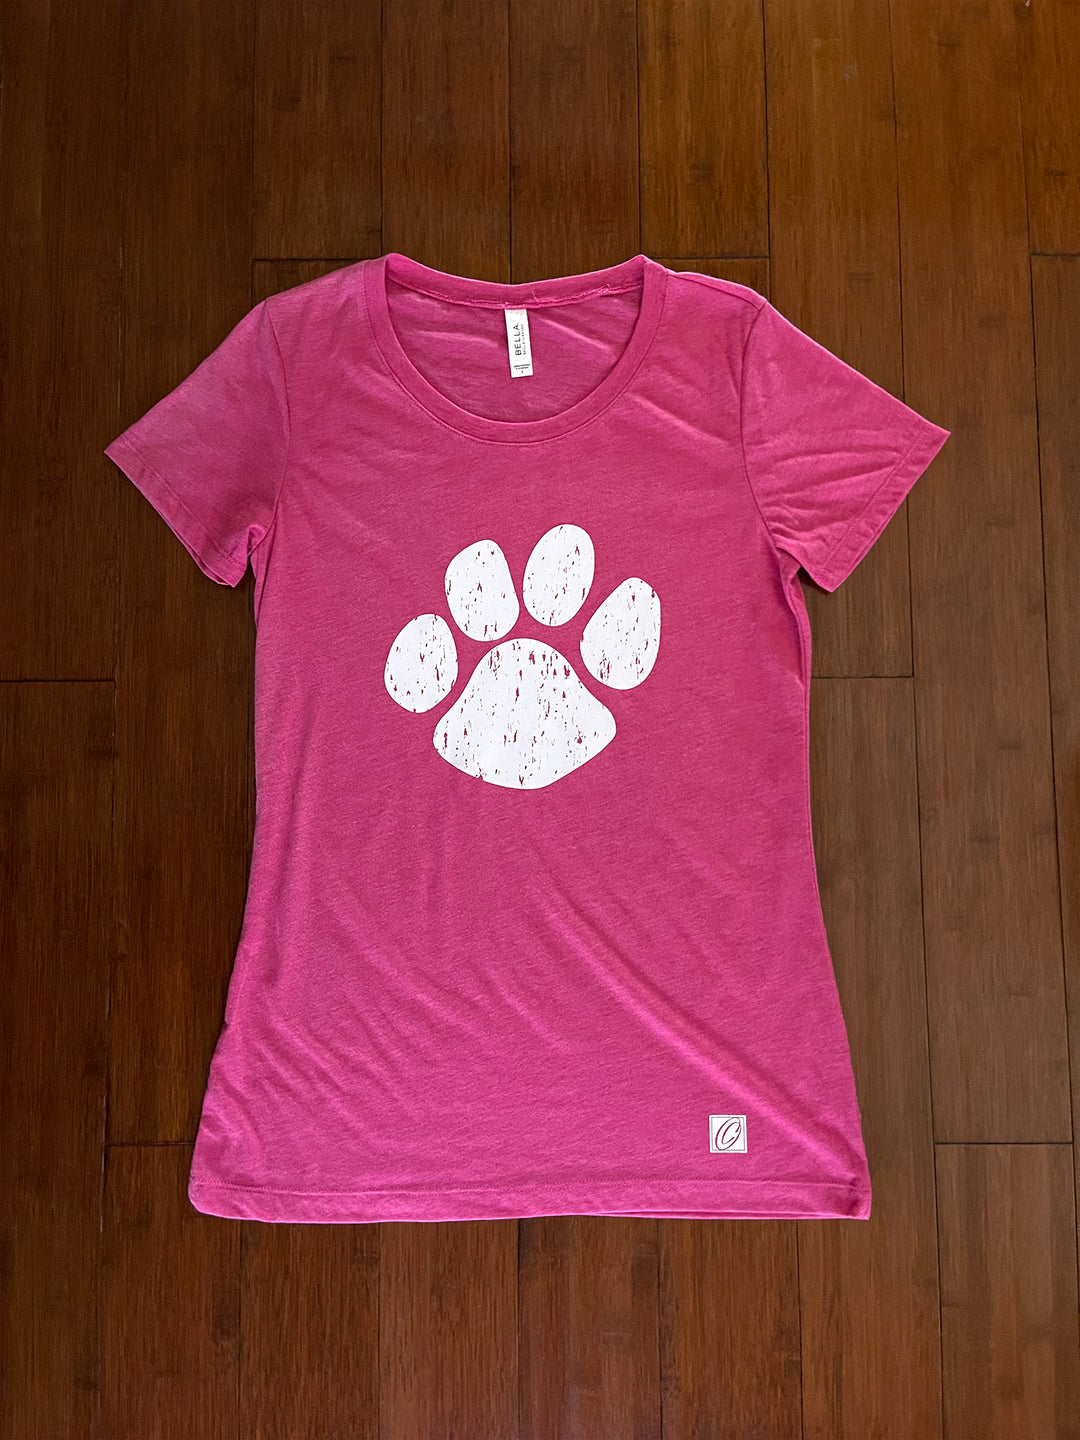 Ladies L Bella Canvas Fitted Triblend Crewneck Short Sleeve Tee - Distressed Paw